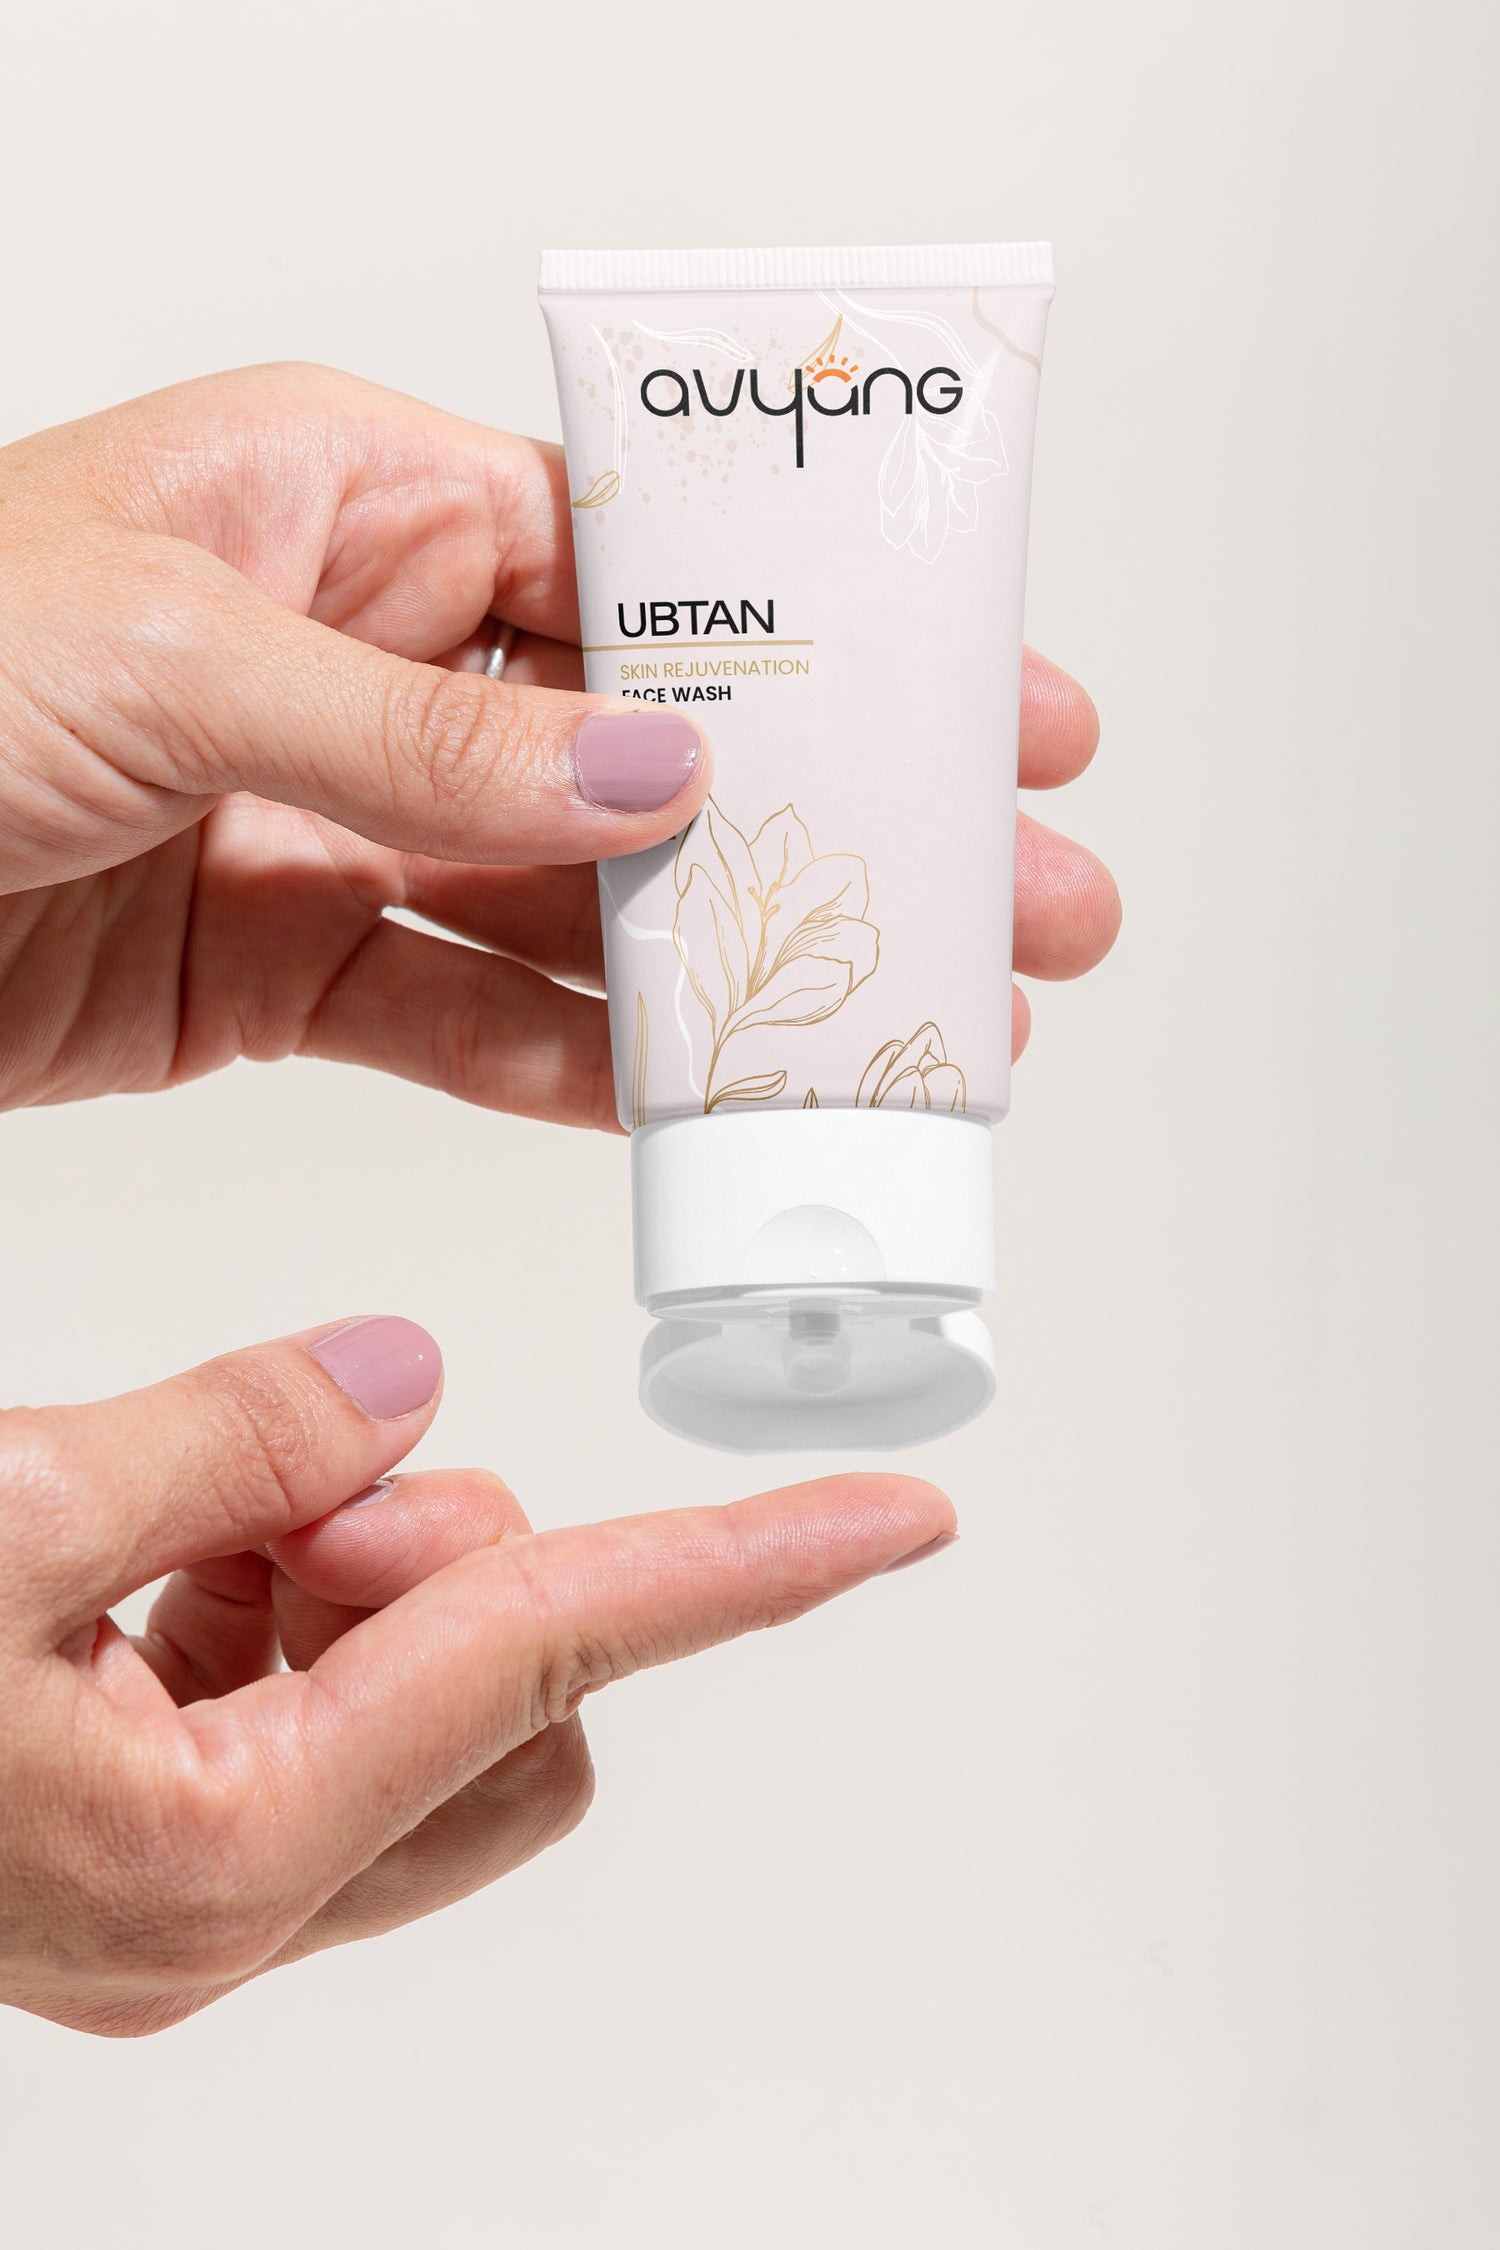 Ubtan Face Wash Image with hands